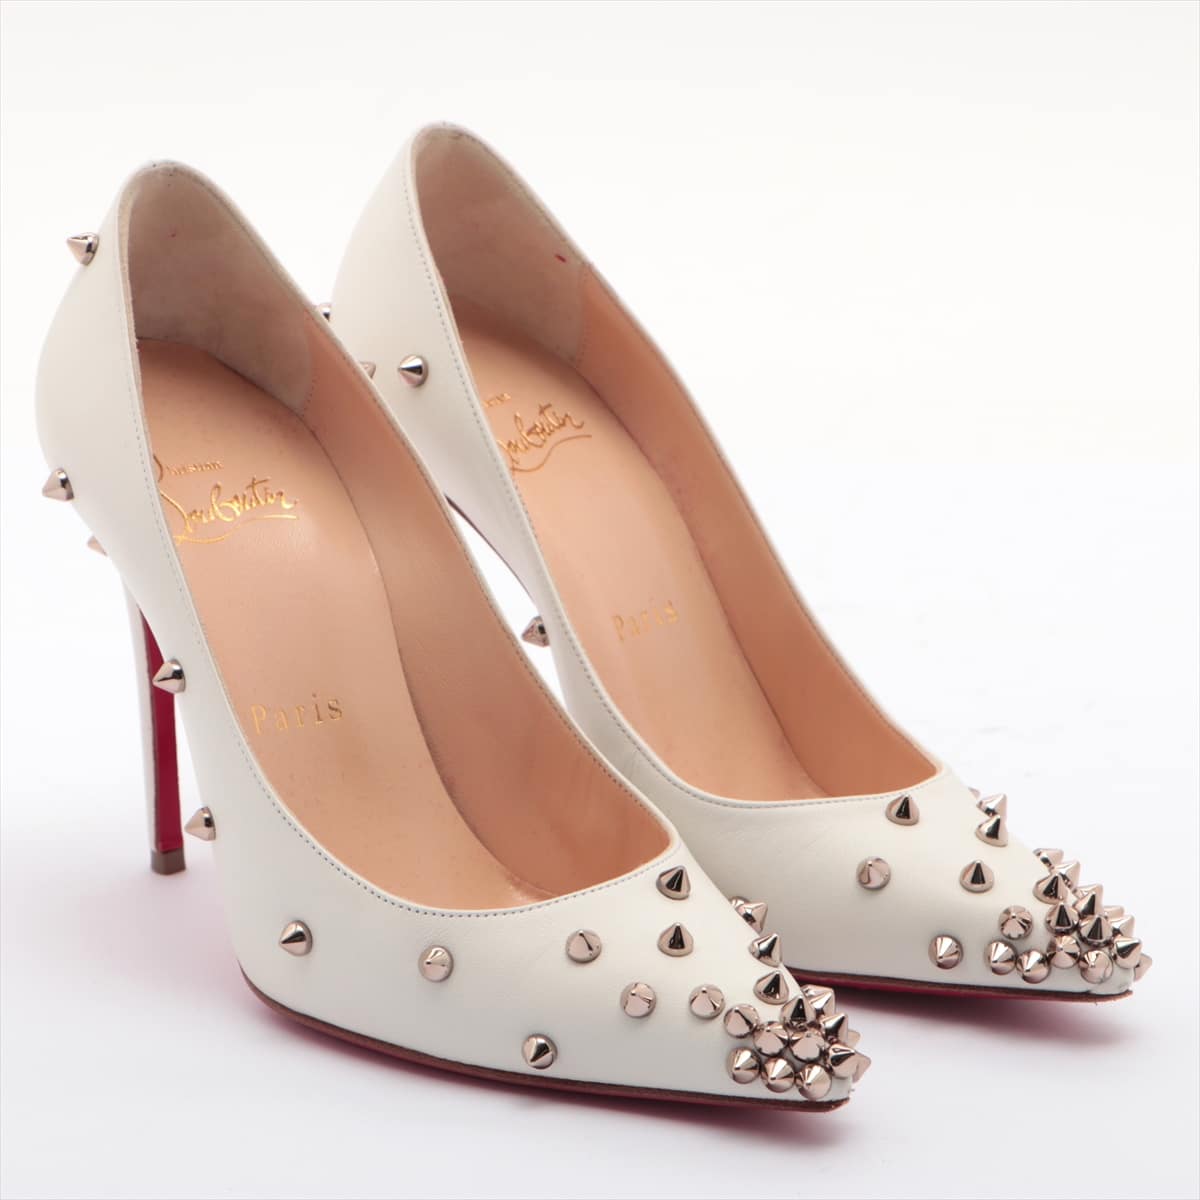 Christian Louboutin Leather Pumps 34.5 Ladies' White Spike Studs